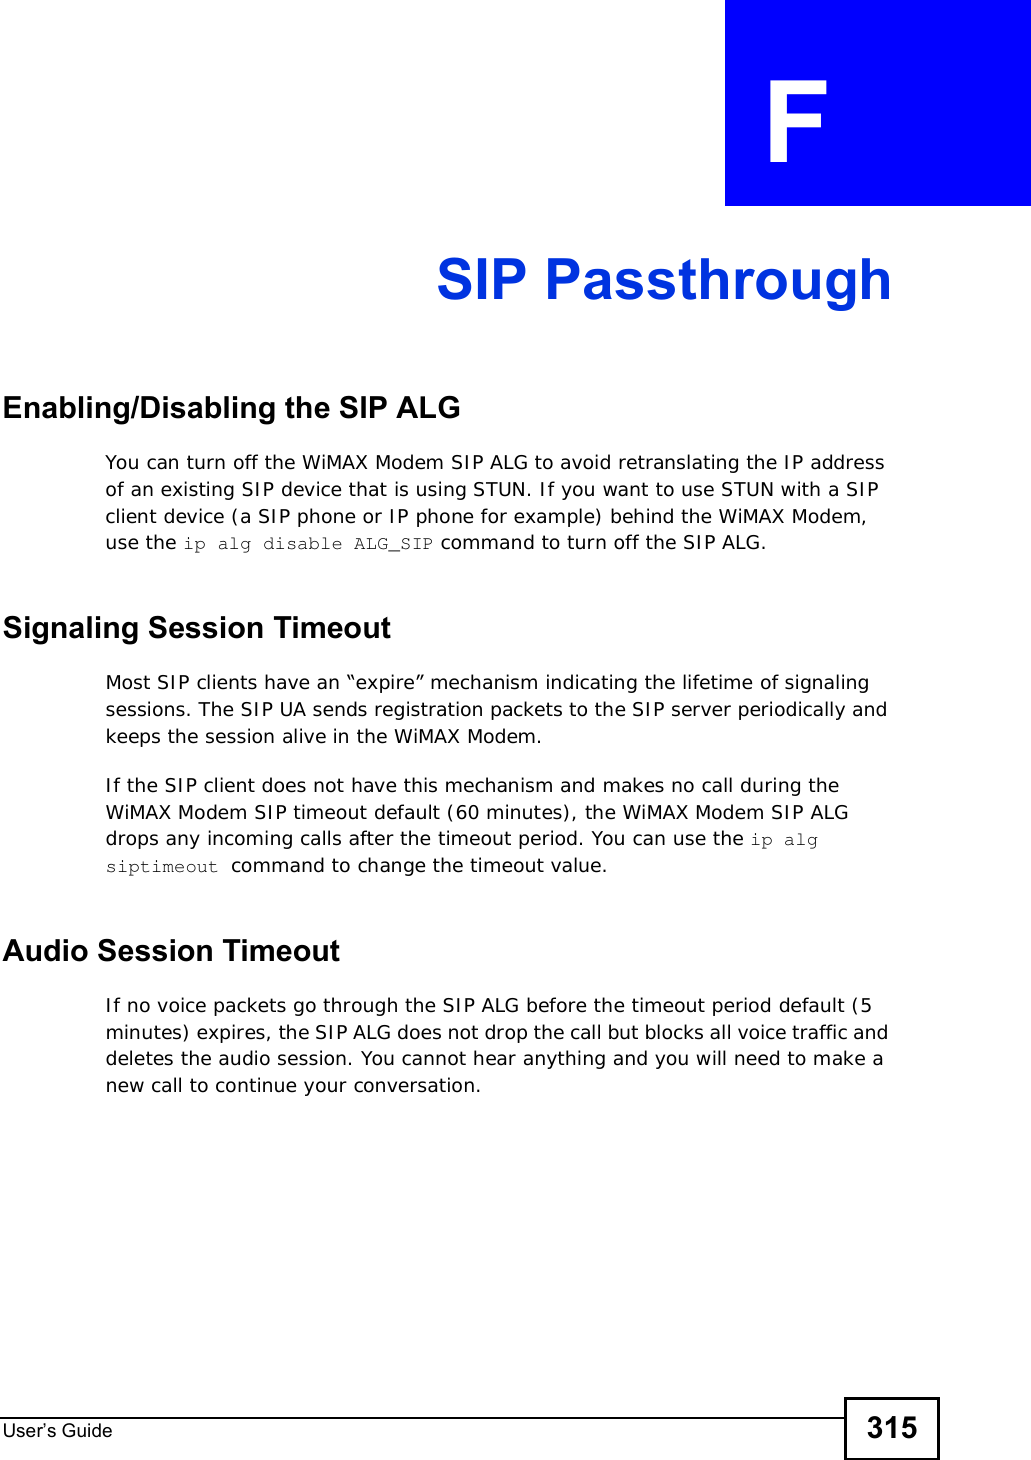 User s Guide 315APPENDIX  F  SIP PassthroughEnabling/Disabling the SIP ALGYou can turn off the WiMAX Modem SIP ALG to avoid retranslating the IP address of an existing SIP device that is using STUN. If you want to use STUN with a SIP client device (a SIP phone or IP phone for example) behind the WiMAX Modem, use the ip alg disable ALG_SIP command to turn off the SIP ALG.Signaling Session TimeoutMost SIP clients have an “expire” mechanism indicating the lifetime of signaling sessions. The SIP UA sends registration packets to the SIP server periodically and keeps the session alive in the WiMAX Modem. If the SIP client does not have this mechanism and makes no call during the WiMAX Modem SIP timeout default (60 minutes), the WiMAX Modem SIP ALG drops any incoming calls after the timeout period. You can use the ip alg siptimeout command to change the timeout value.Audio Session TimeoutIf no voice packets go through the SIP ALG before the timeout period default (5 minutes) expires, the SIP ALG does not drop the call but blocks all voice traffic and deletes the audio session. You cannot hear anything and you will need to make a new call to continue your conversation.